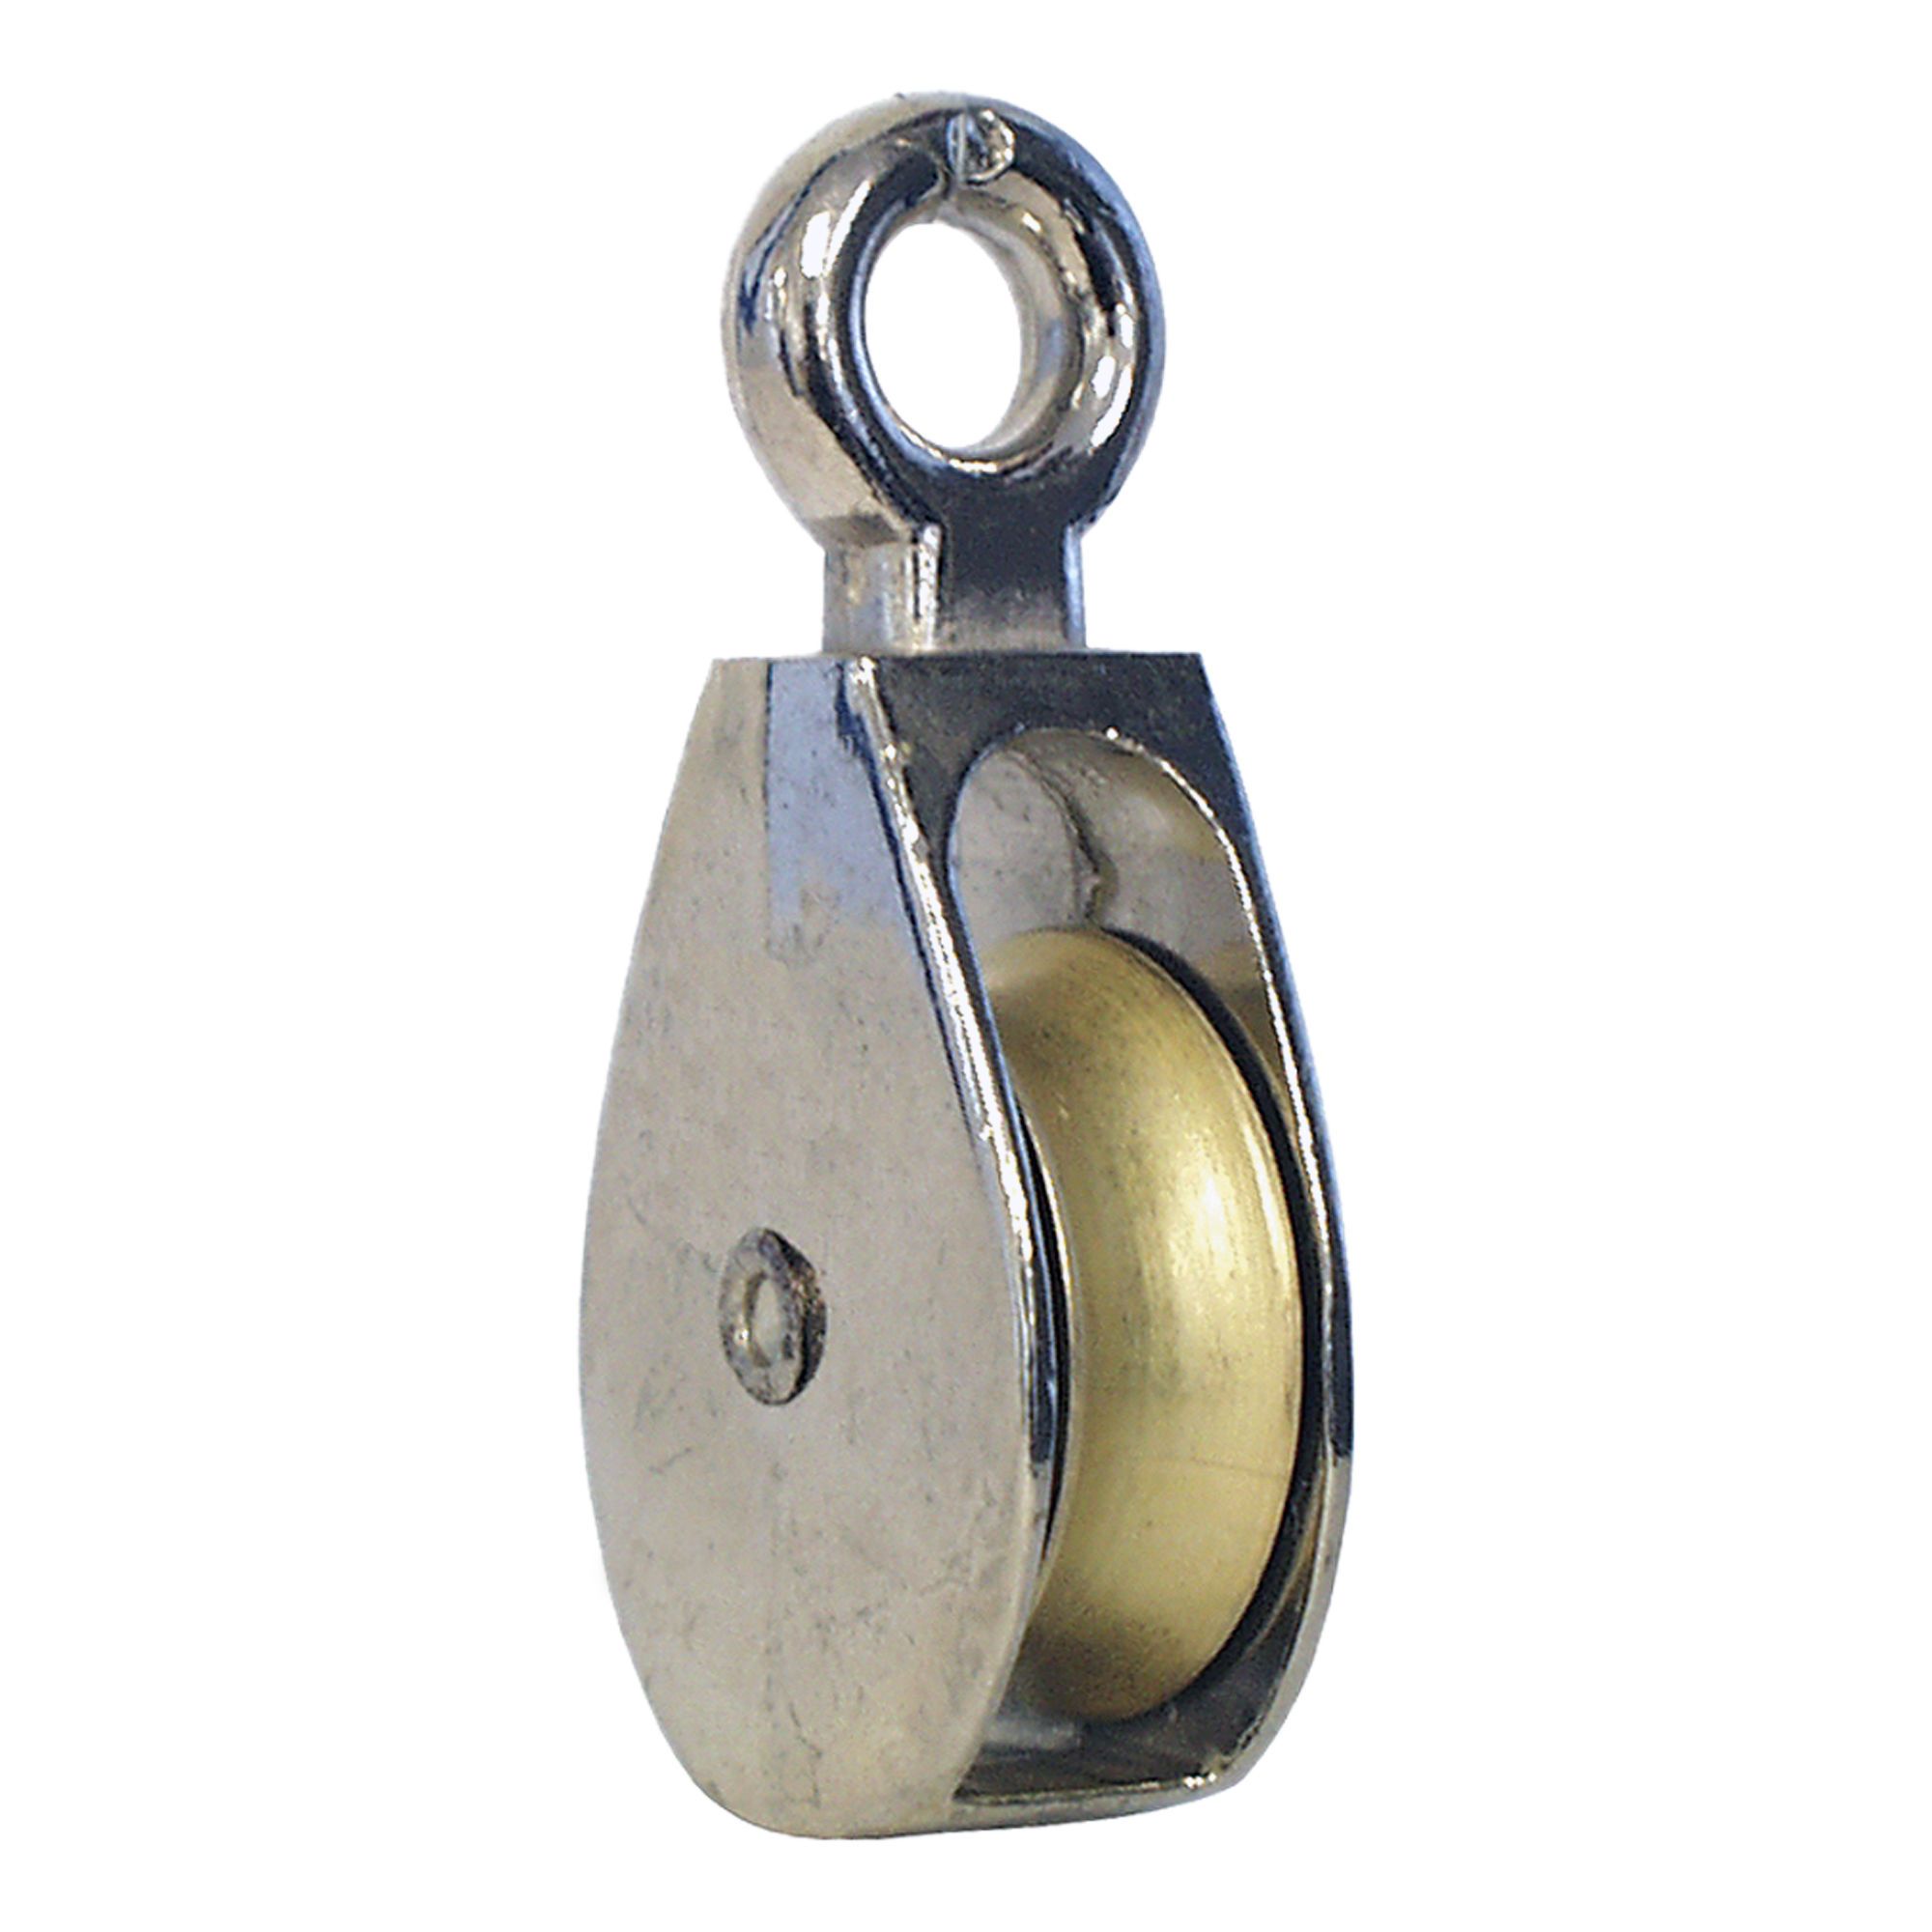 Fixed pulley for rope - 3/4 from DYNALINE